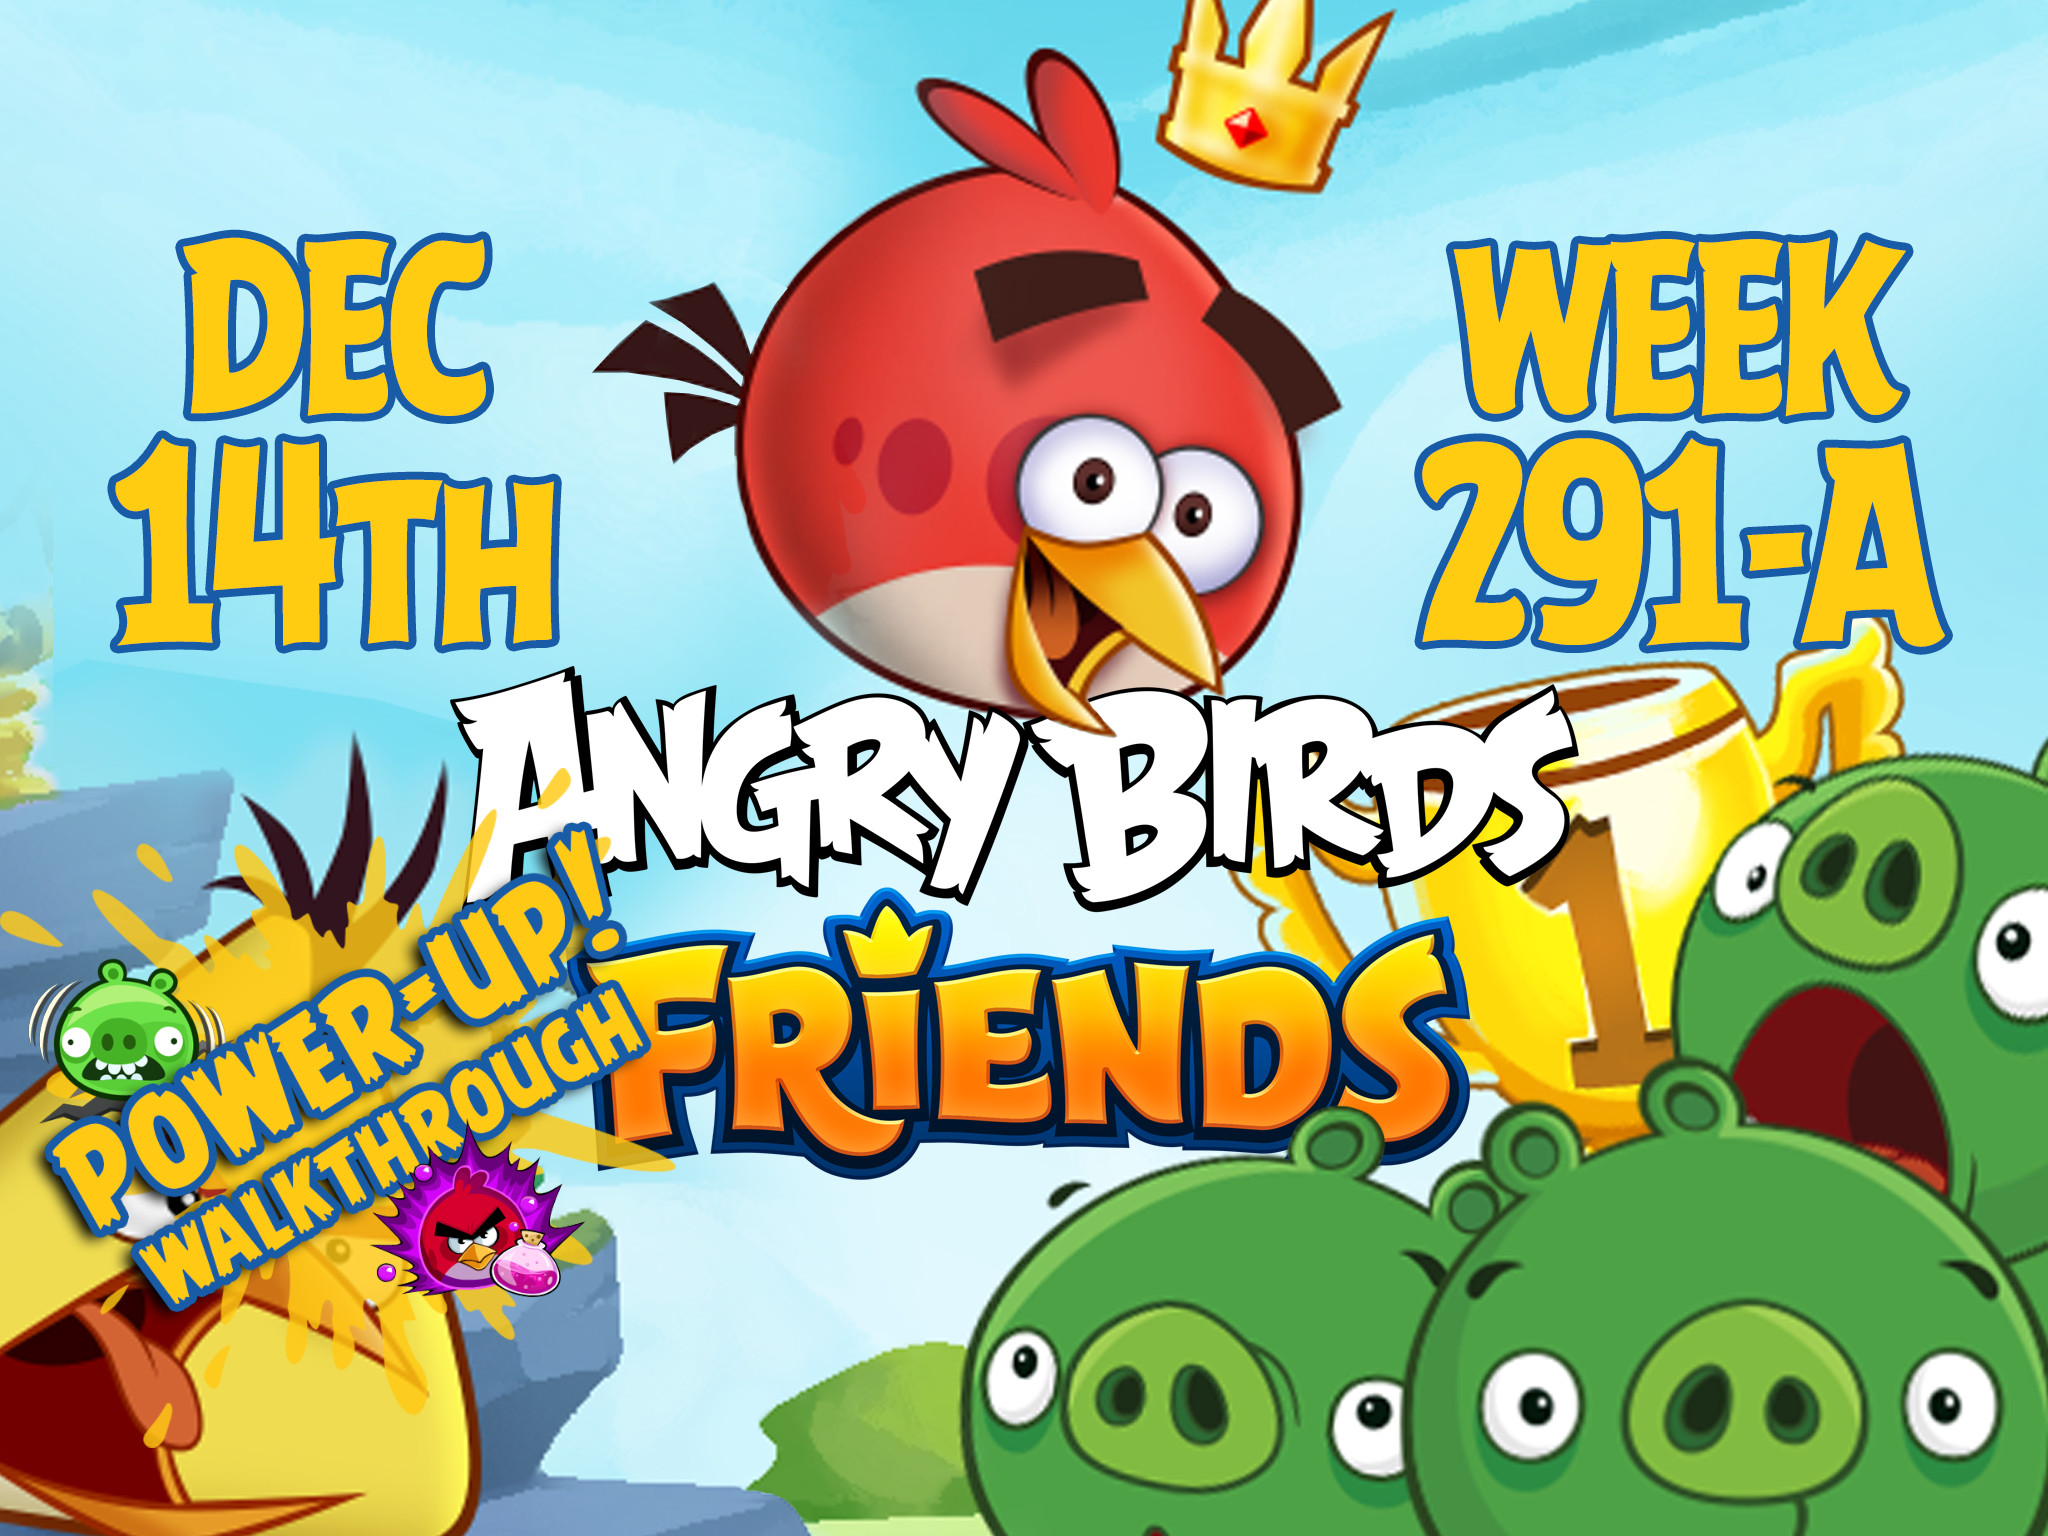 Angry Birds Friends Tournament Week 291-A Feature Image PU